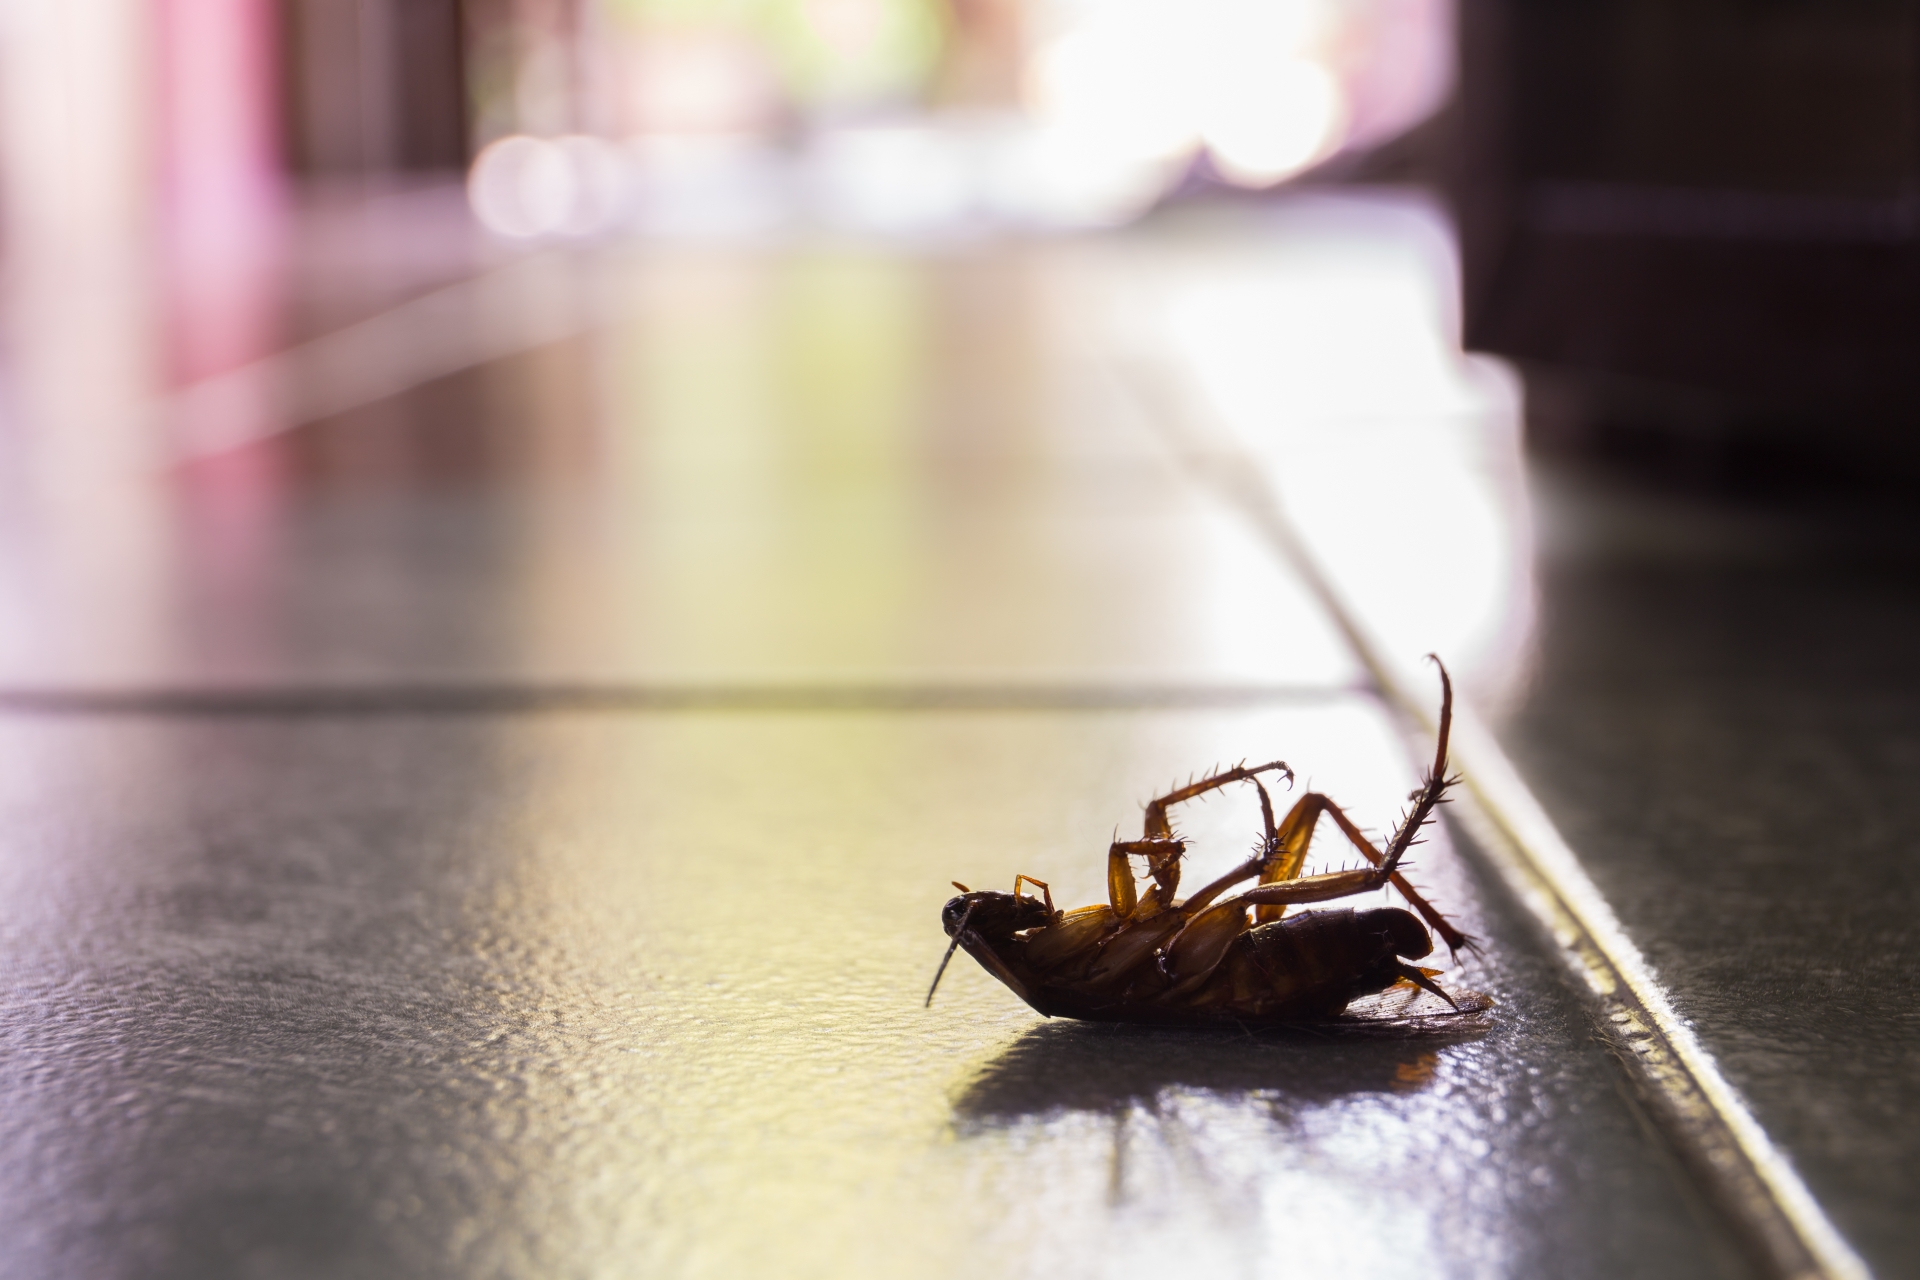 Cockroach Control, Pest Control in Falconwood, Welling, DA16. Call Now 020 8166 9746